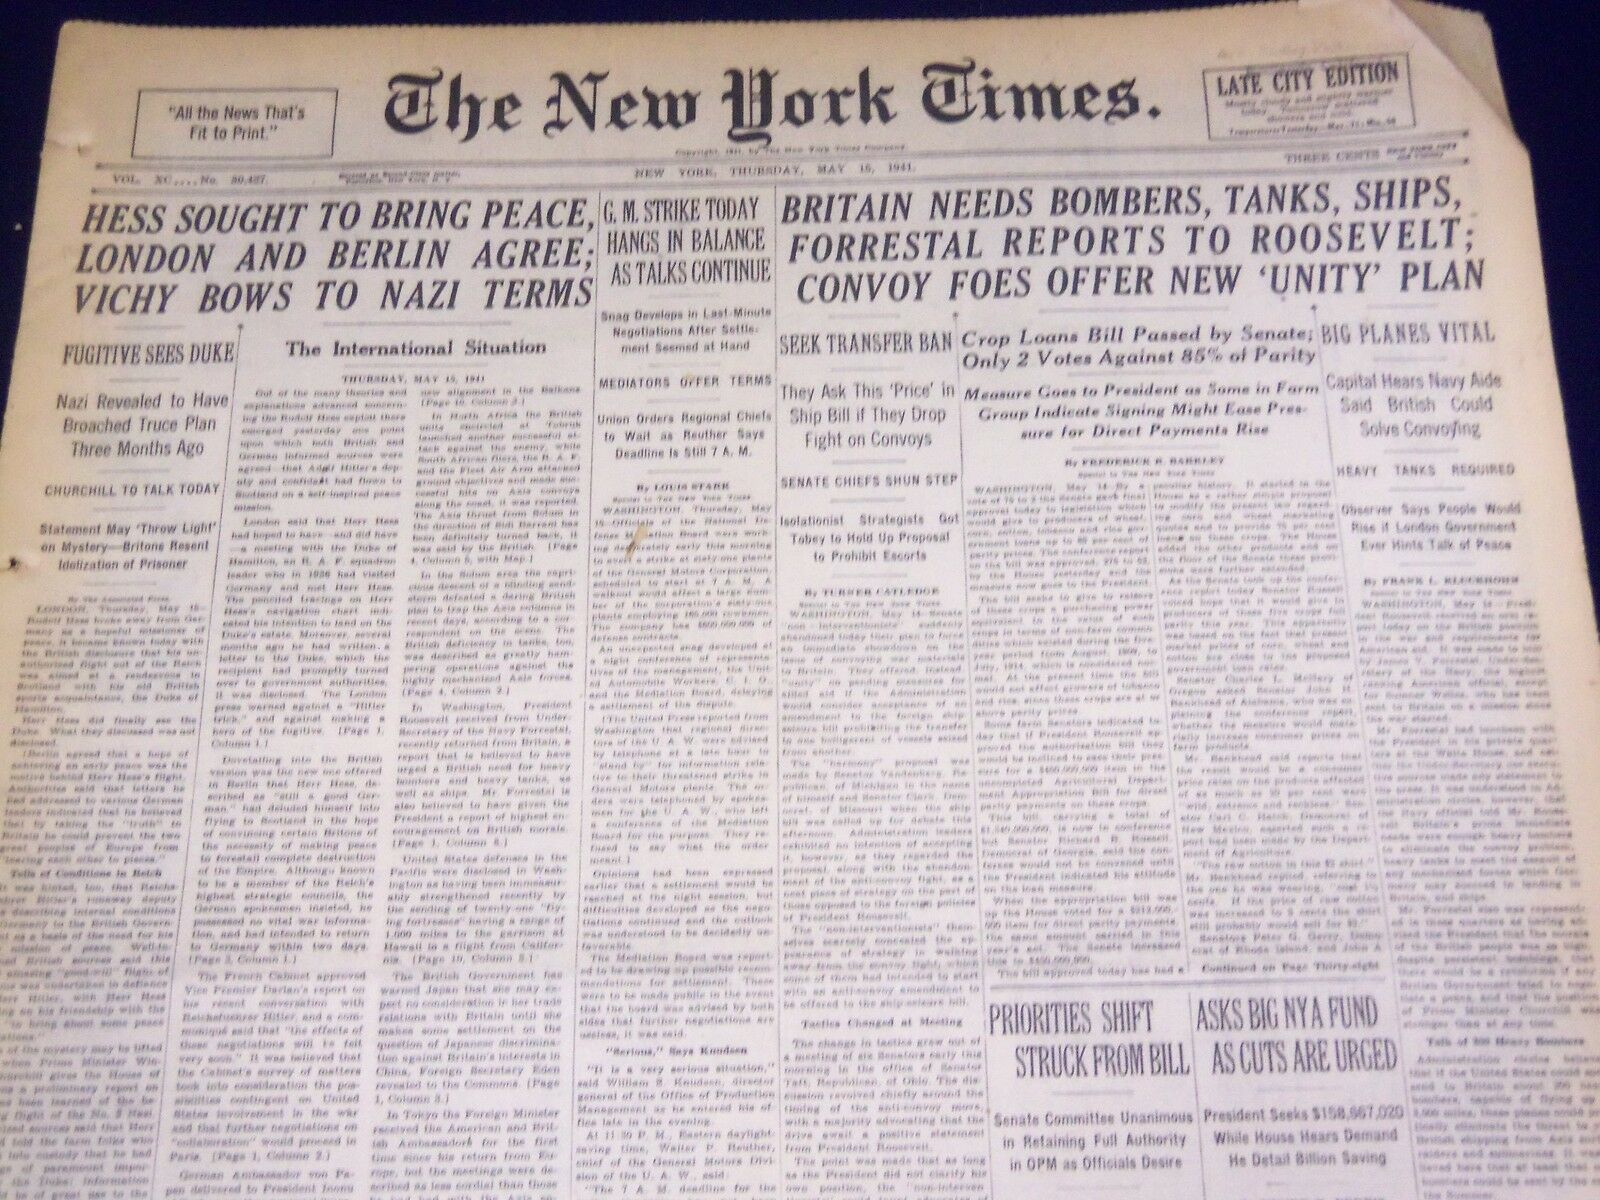 1941 May 15 New York Times - Hess Sought To Bring Peace - Nt 1456